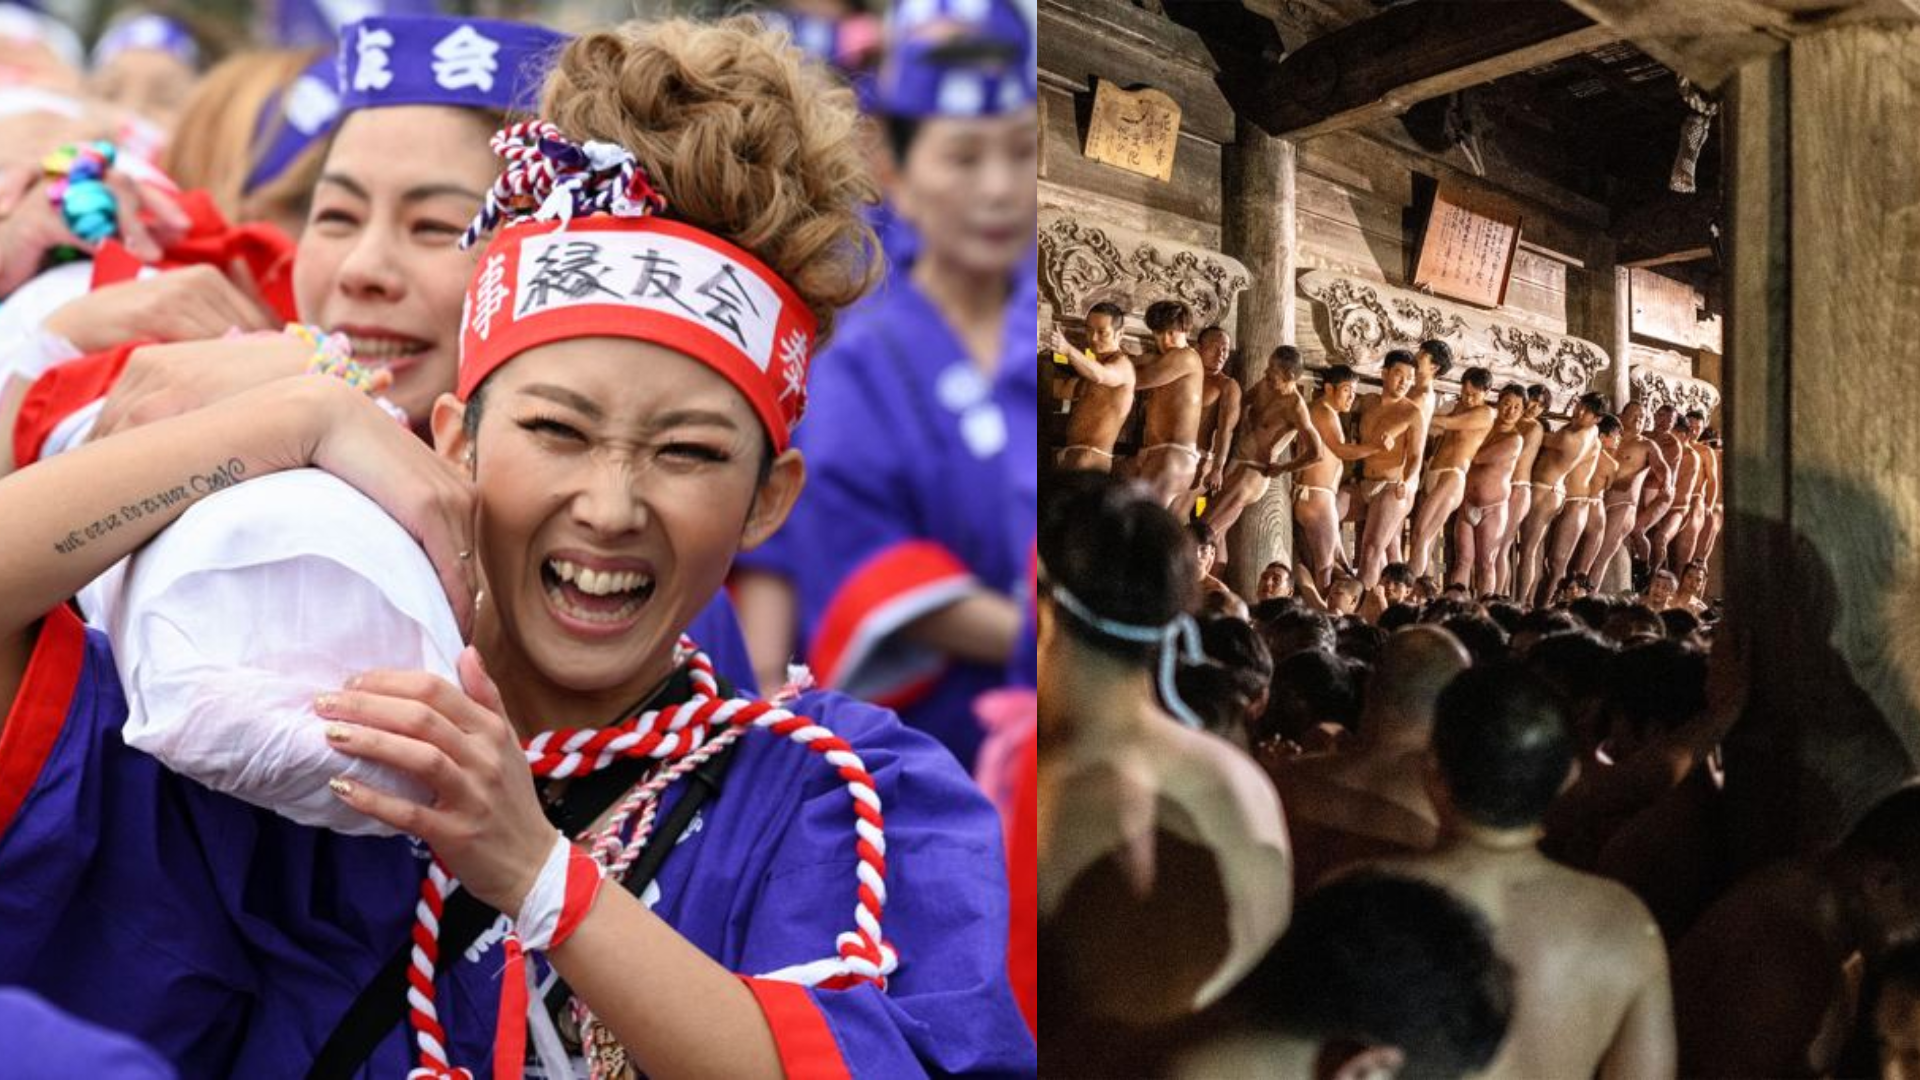 Naked Festival In Japan, Woman Takes Part For The 1st Time In 1,250 Years